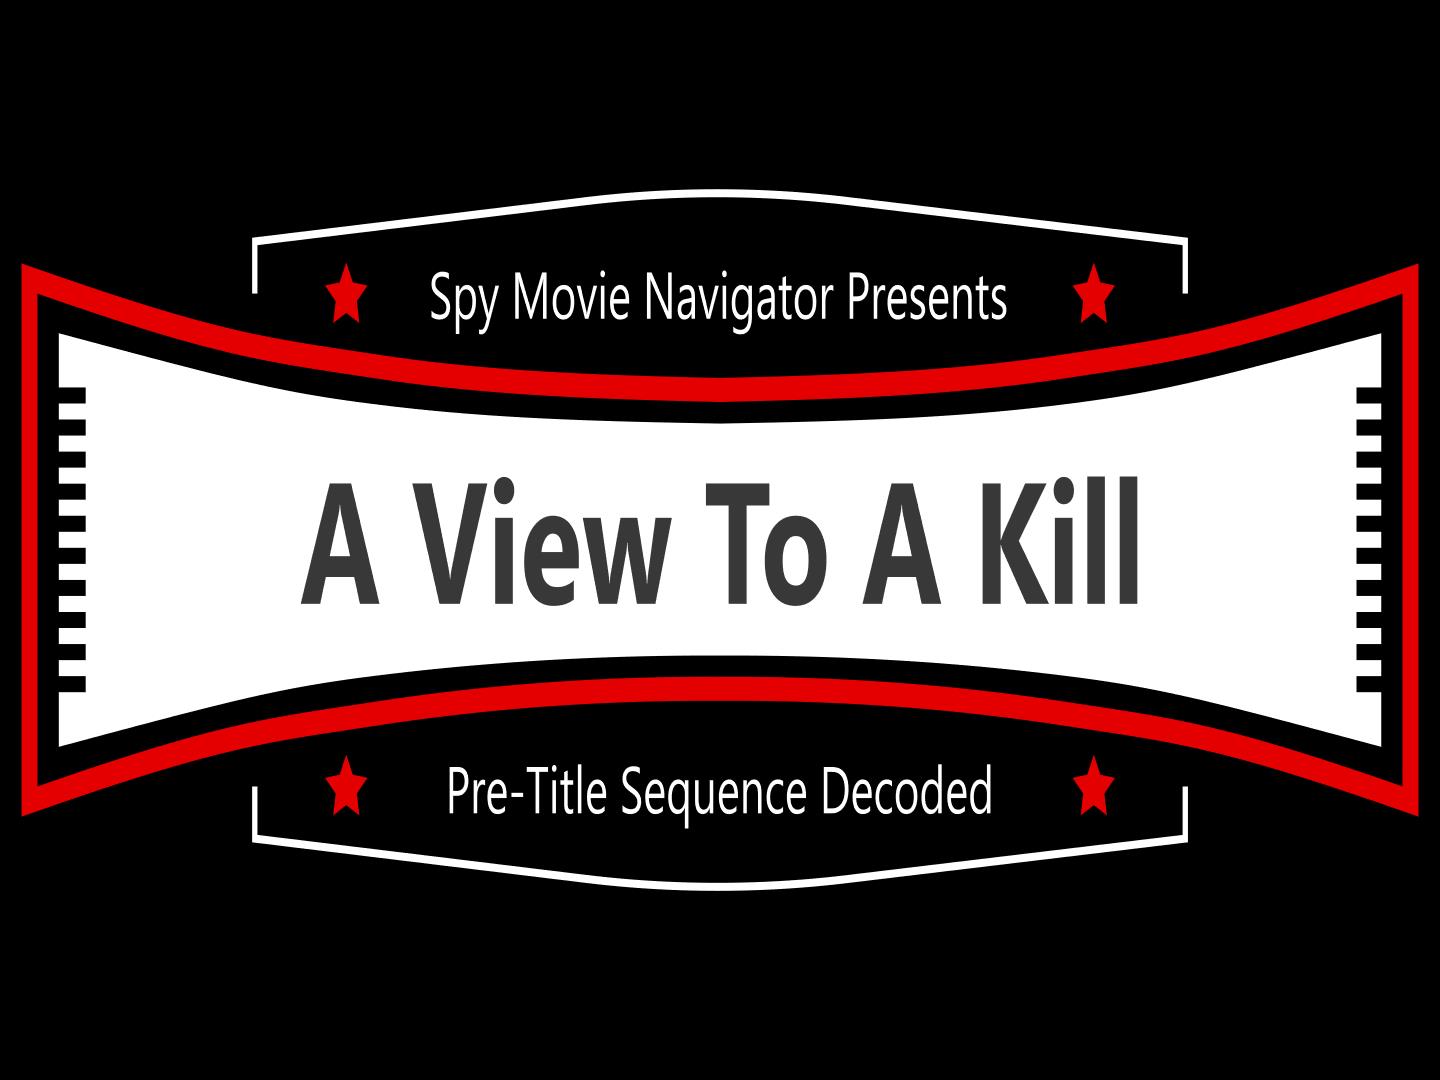 James Bond 007’s A VIEW TO A KILL Pre-Title Decoded!